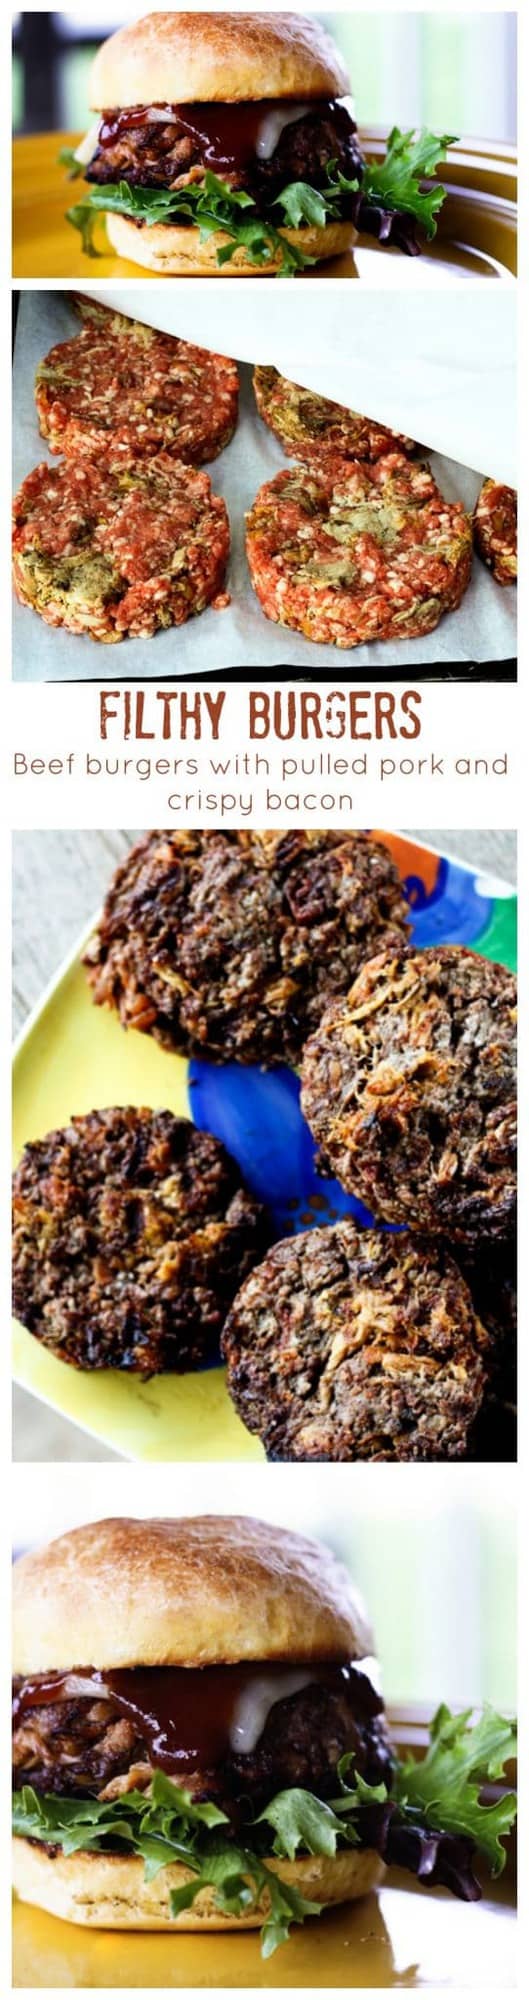 Filthy Burgers: beef burgers laced with pulled pork and crispy bacon.